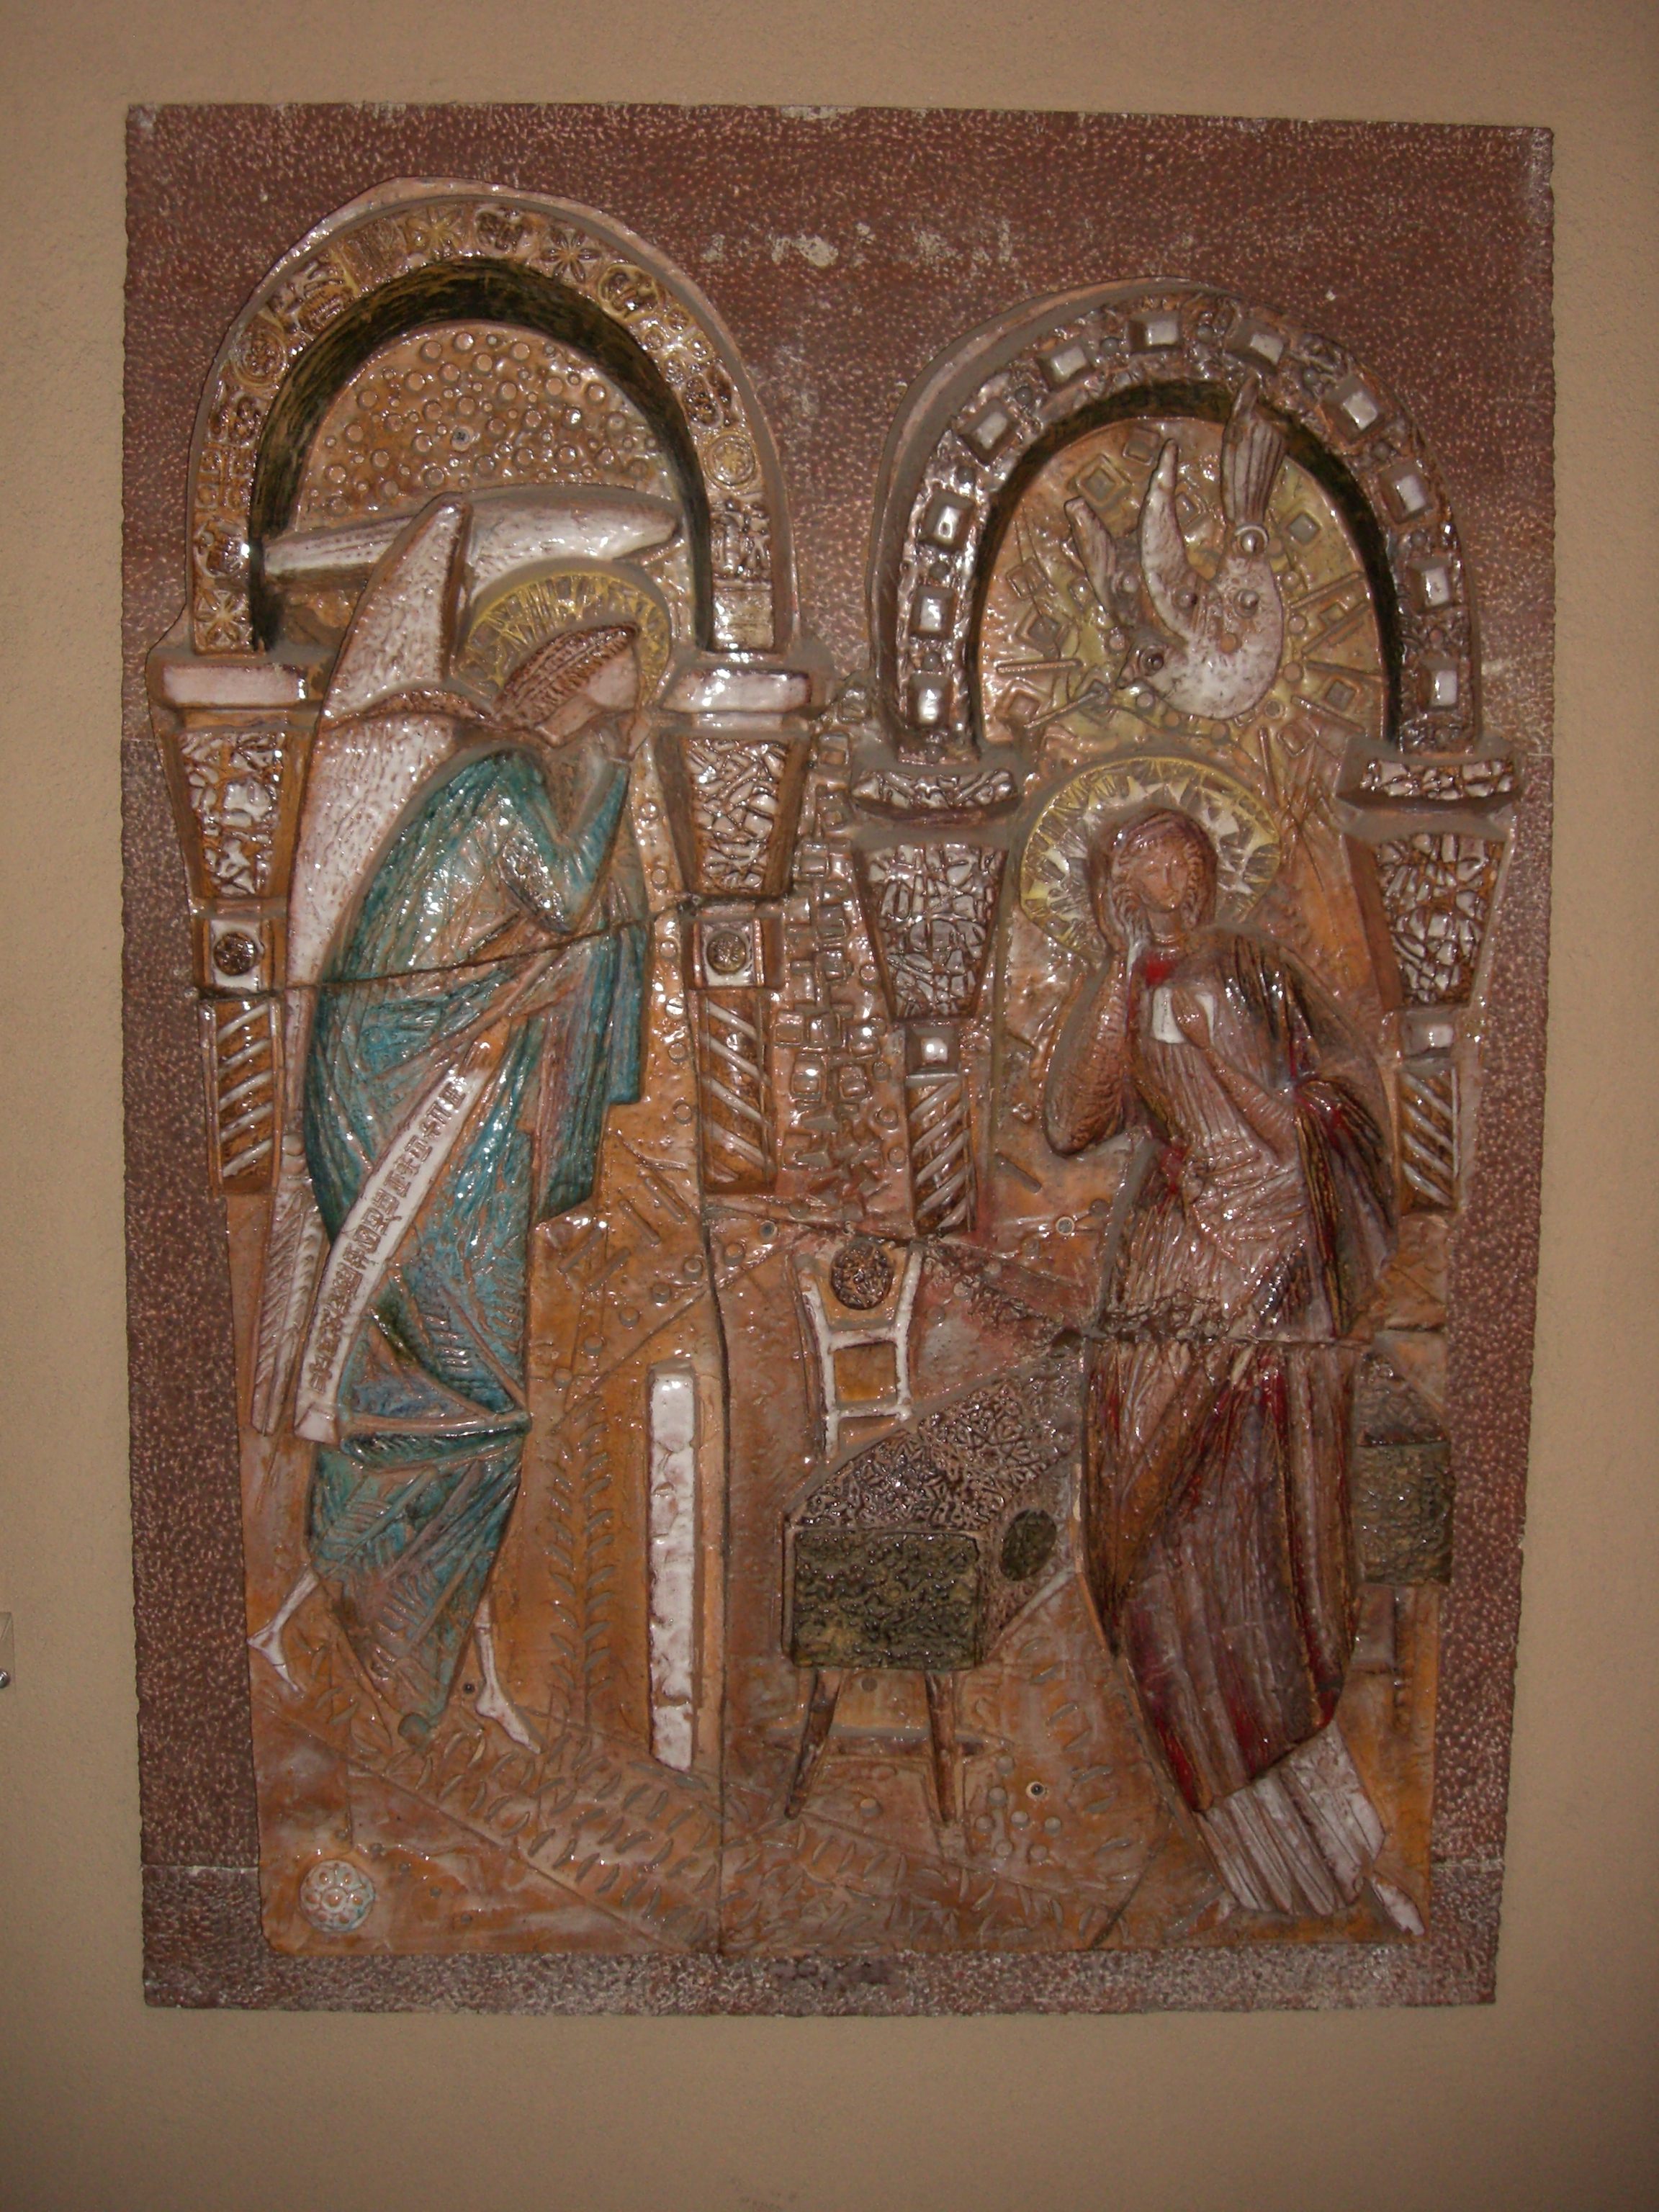 Vatican Museum - Collection of Modern Religious Art - Annunciation | Saint Mary's Press2304 x 3072